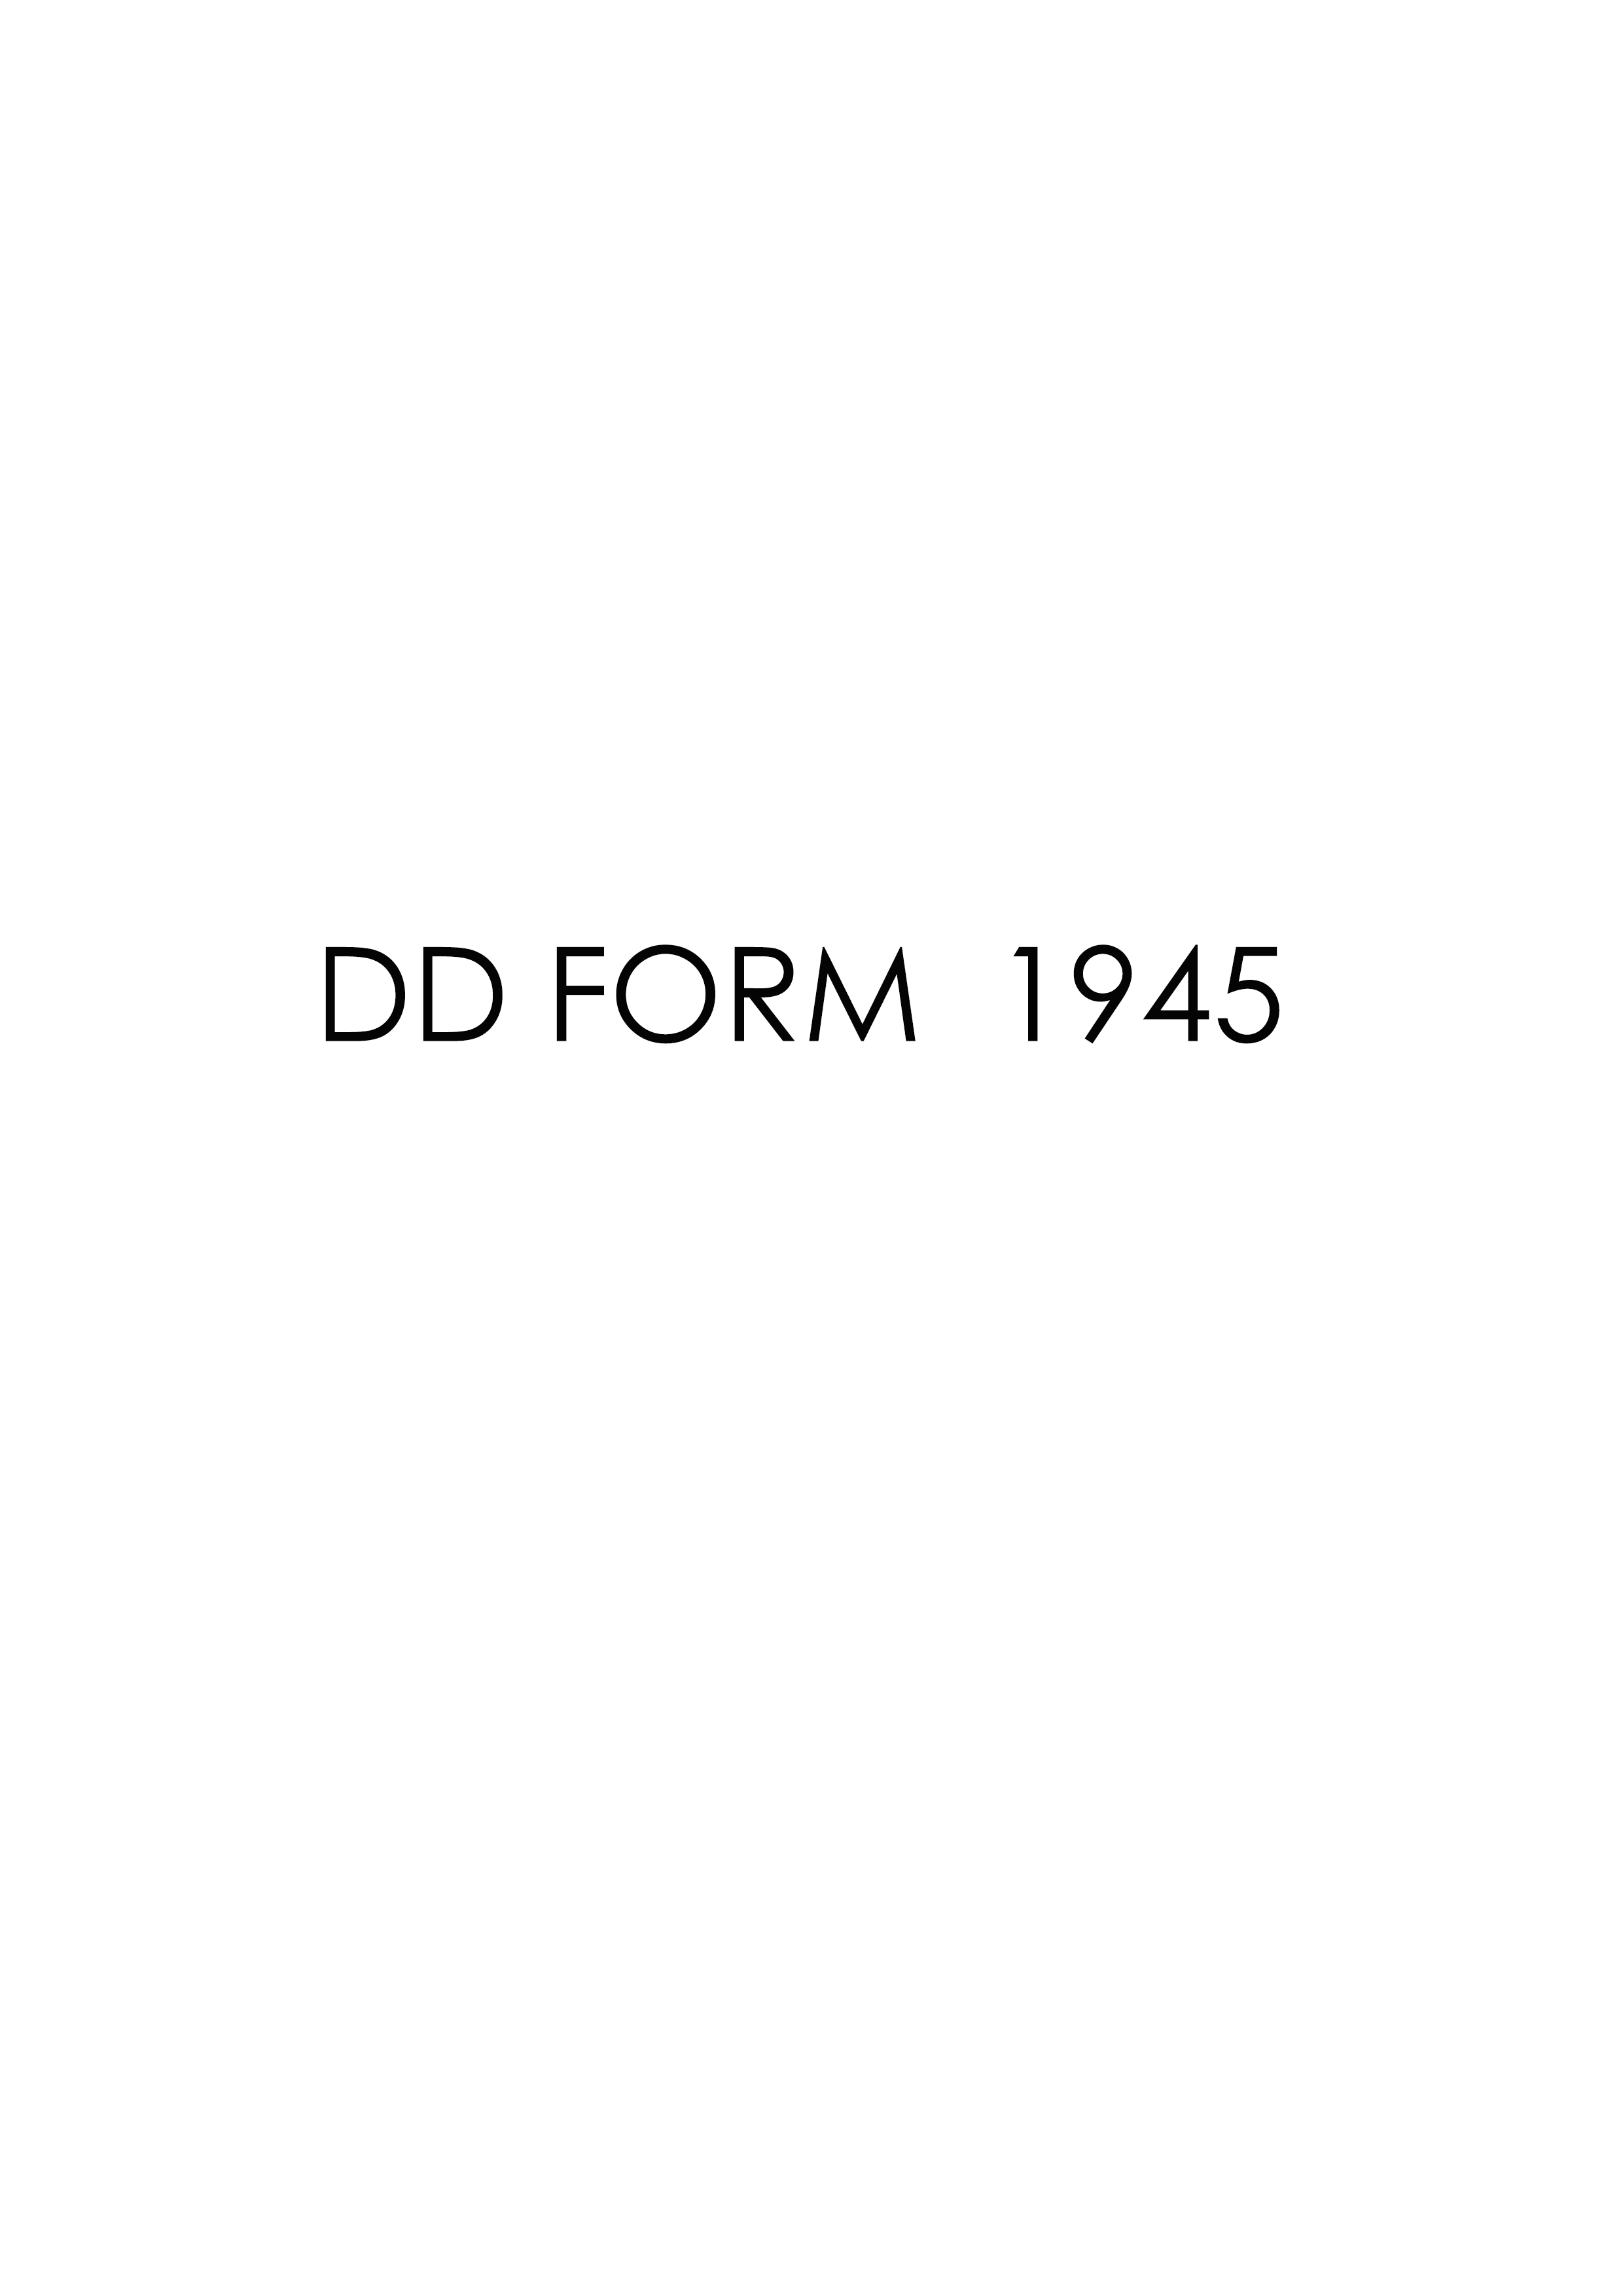 Download Fillable dd Form 1945